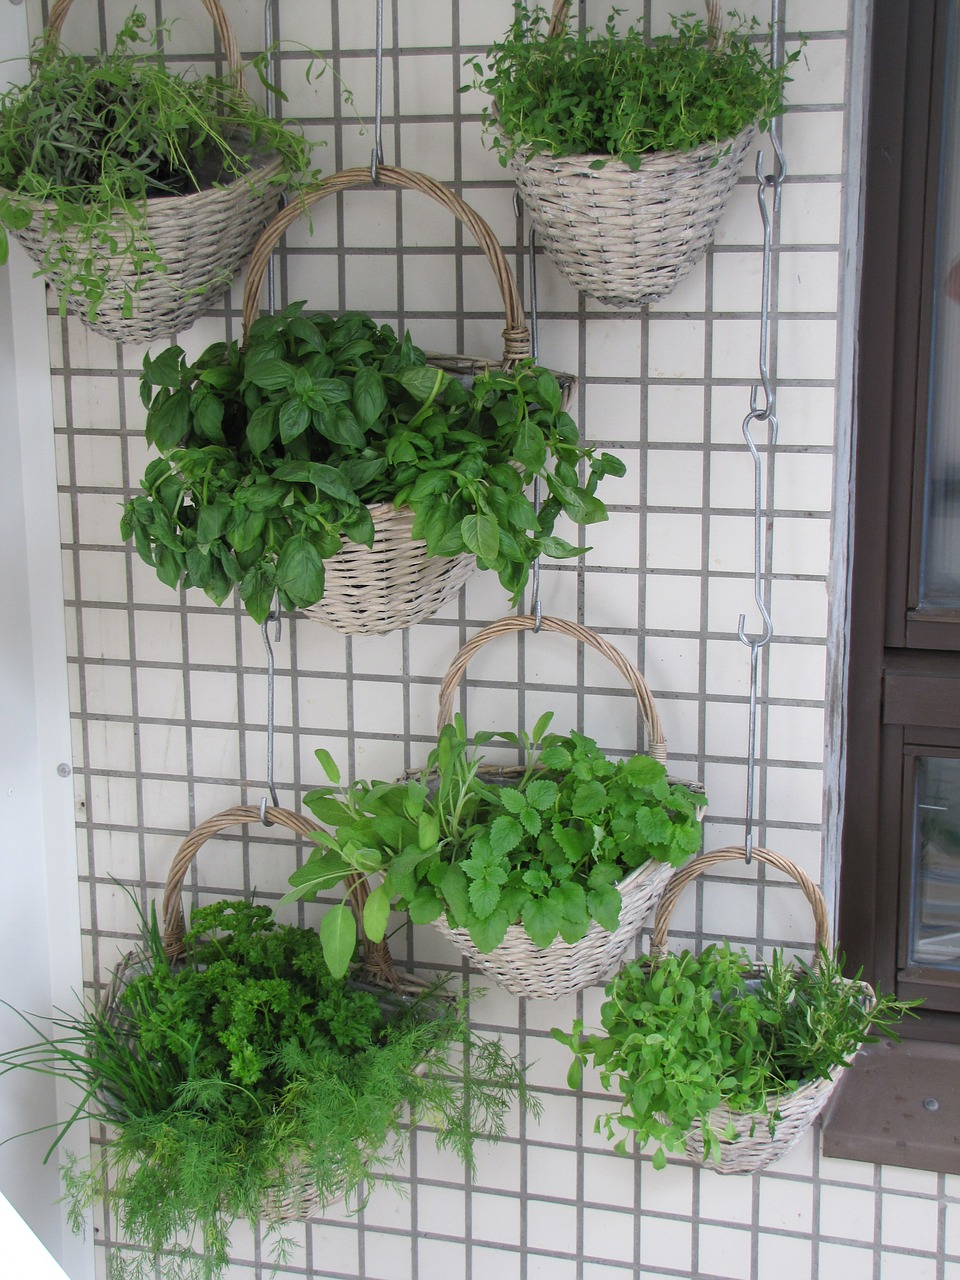 Herbs growing in baskets hanging on wall